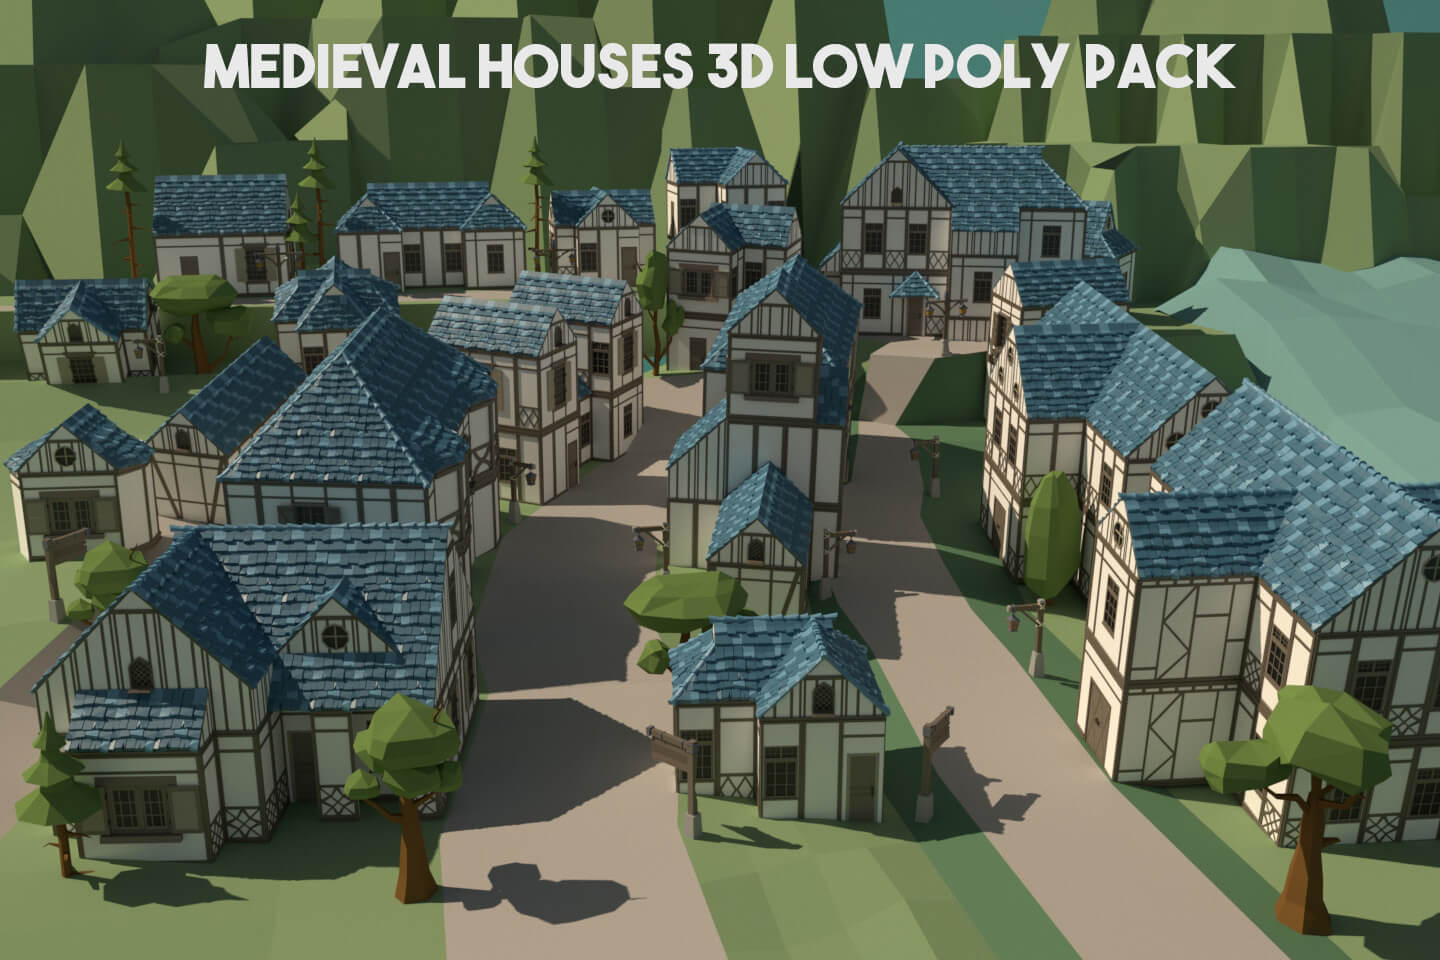 Free Medieval Houses 3D Low Poly Pack - CraftPix.net